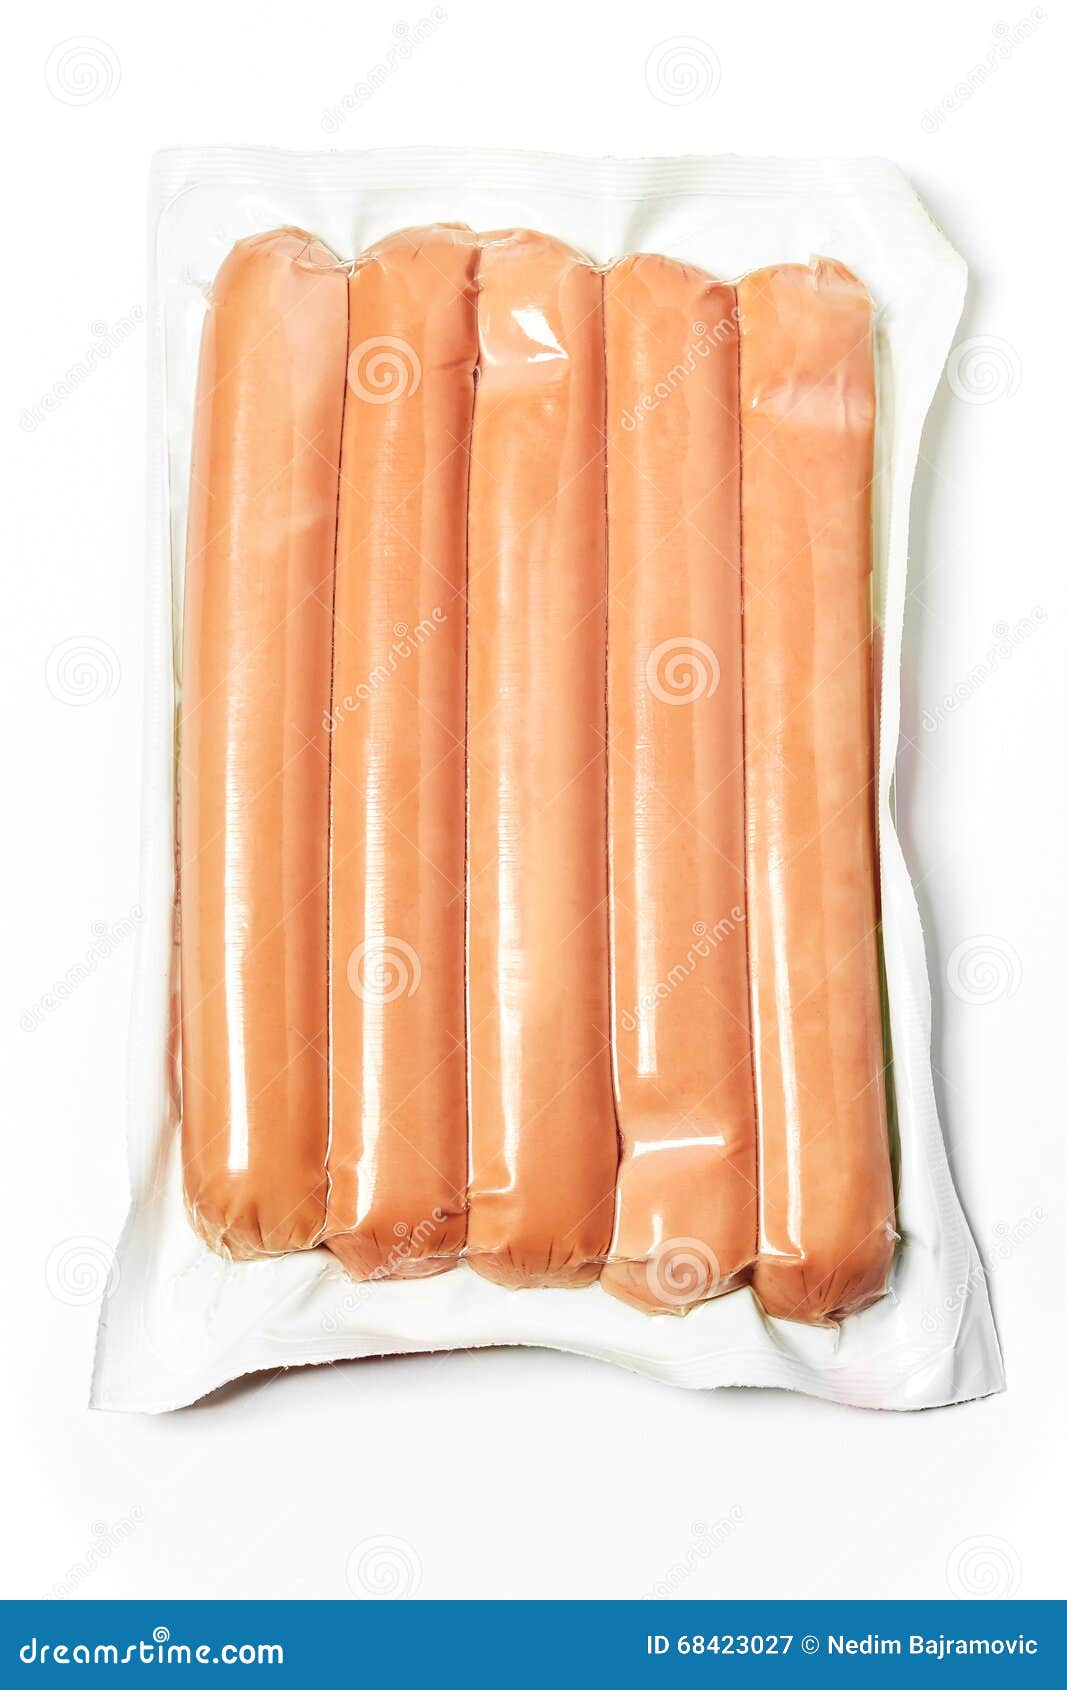 Download Pack Of Raw Hot Dogs In Plastic Packaging Stock Image - Image of meal, gastronomy: 68423027